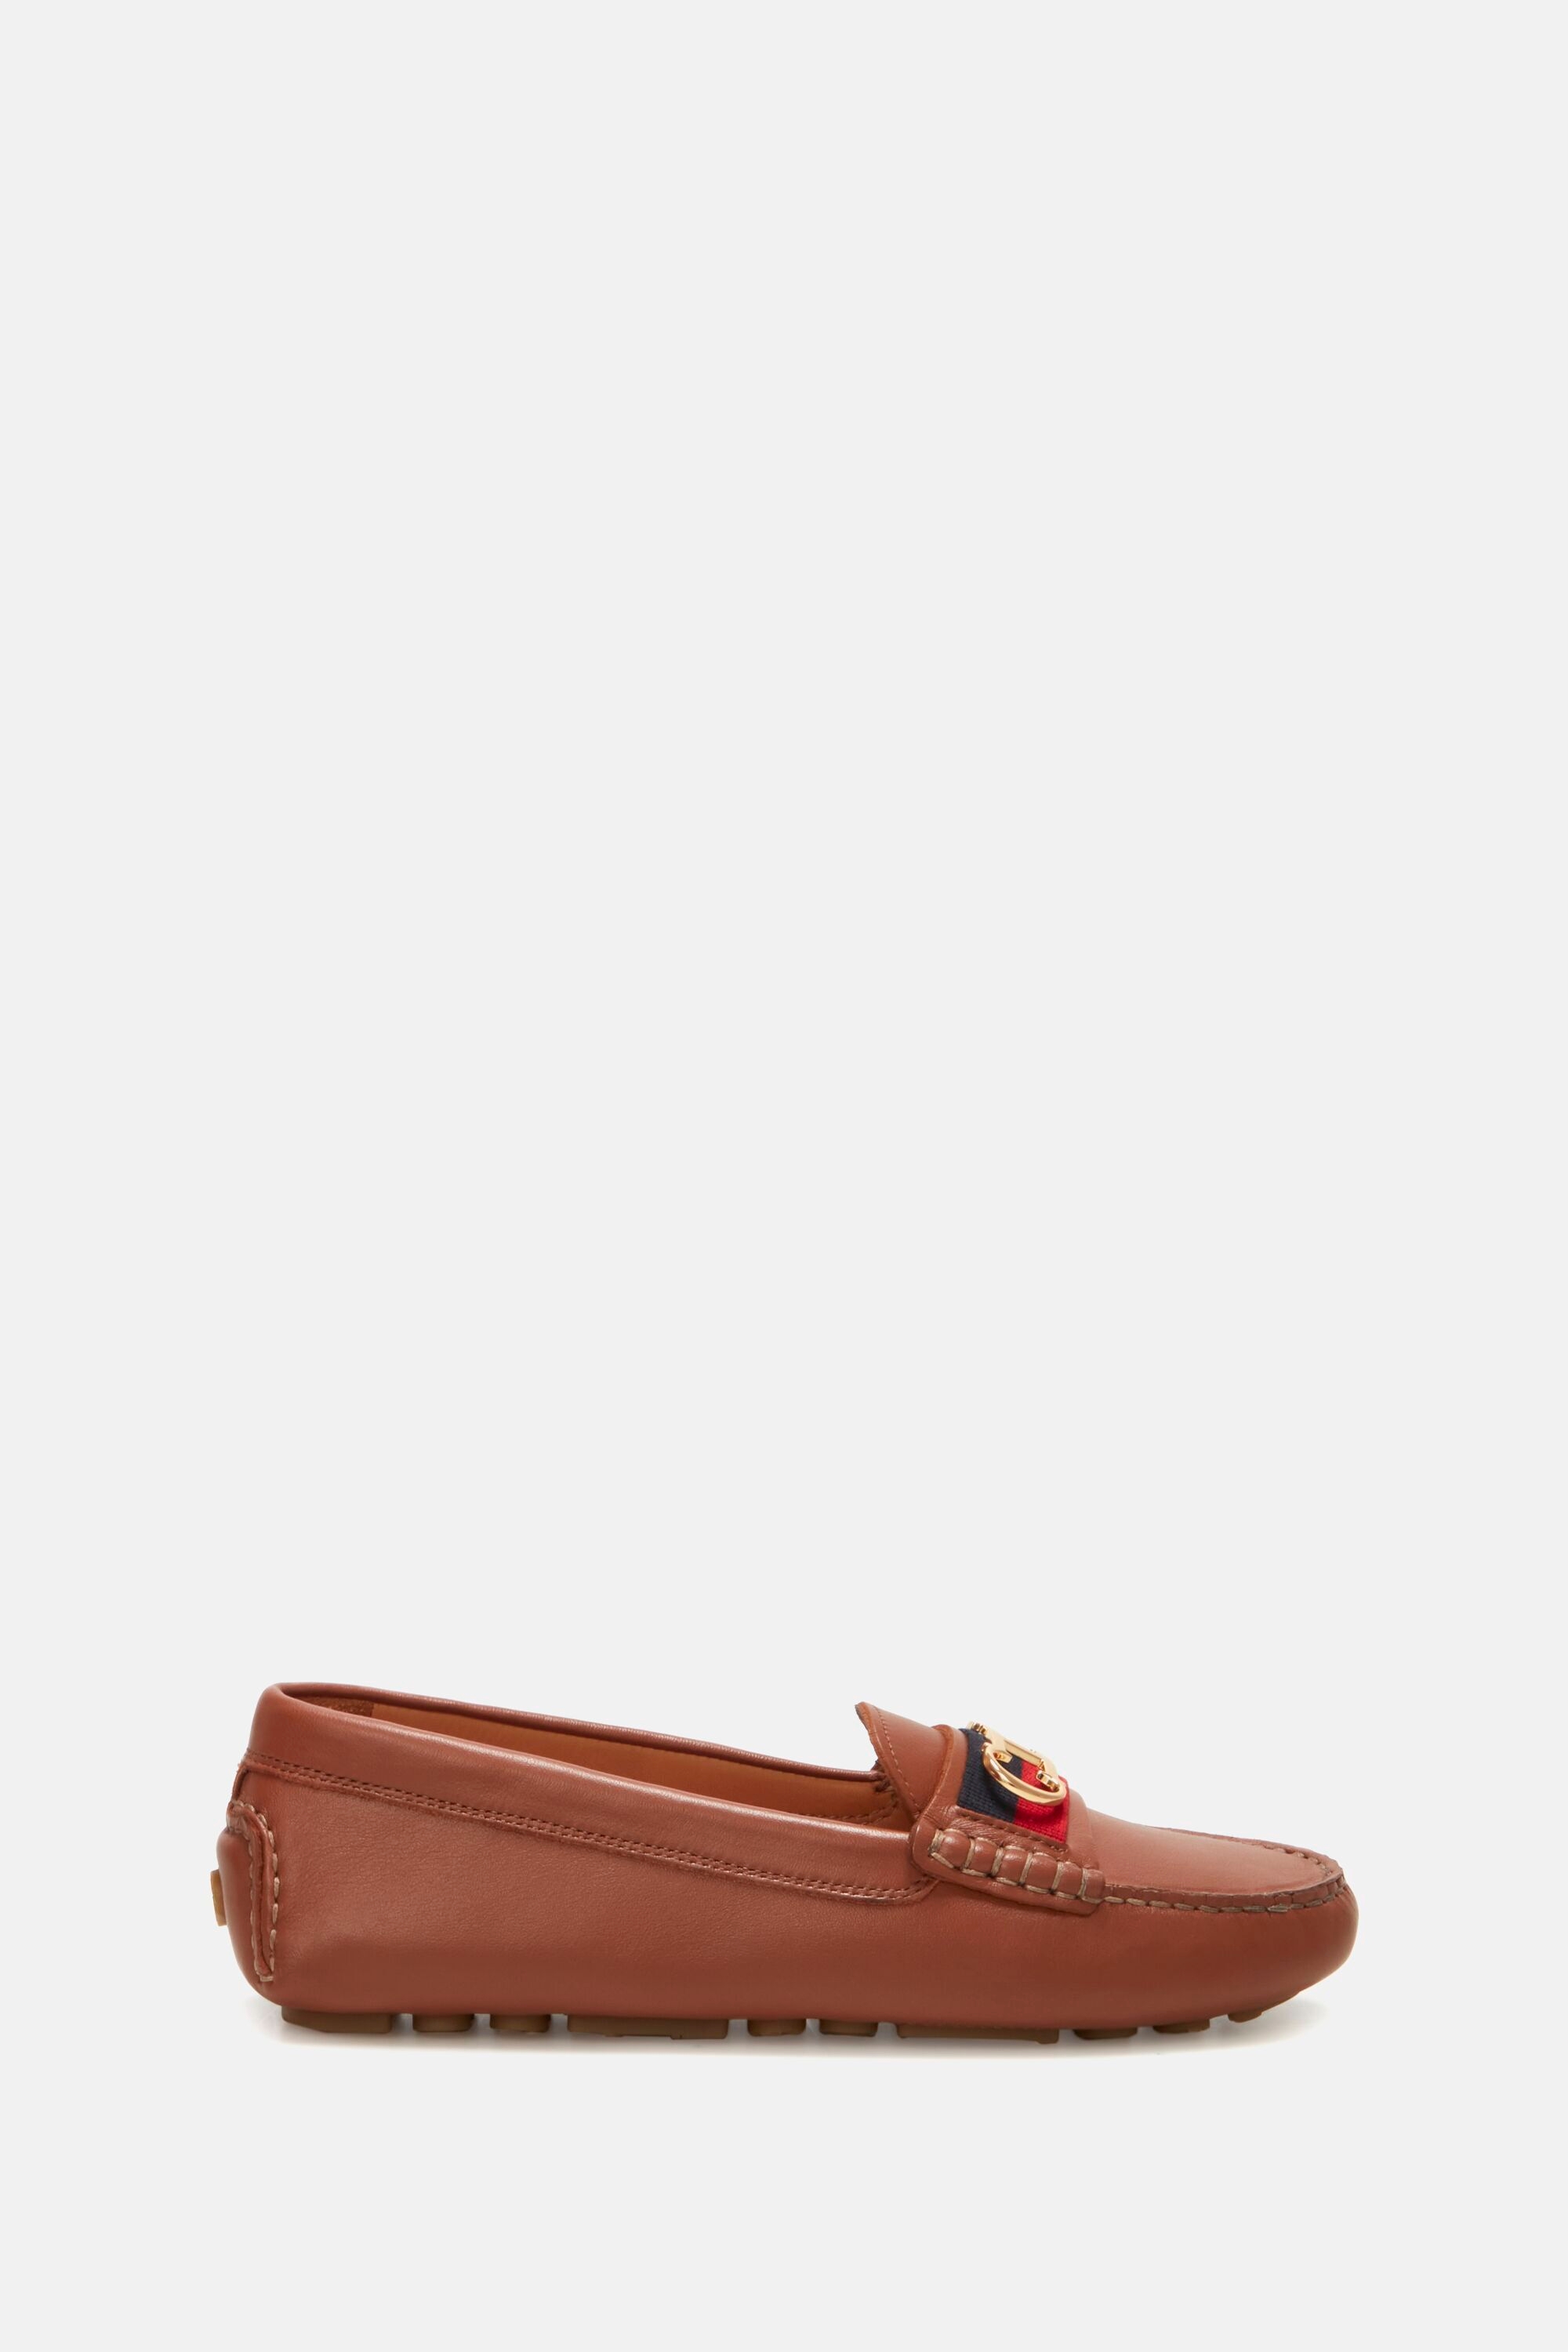 Initials Insignia leather loafers